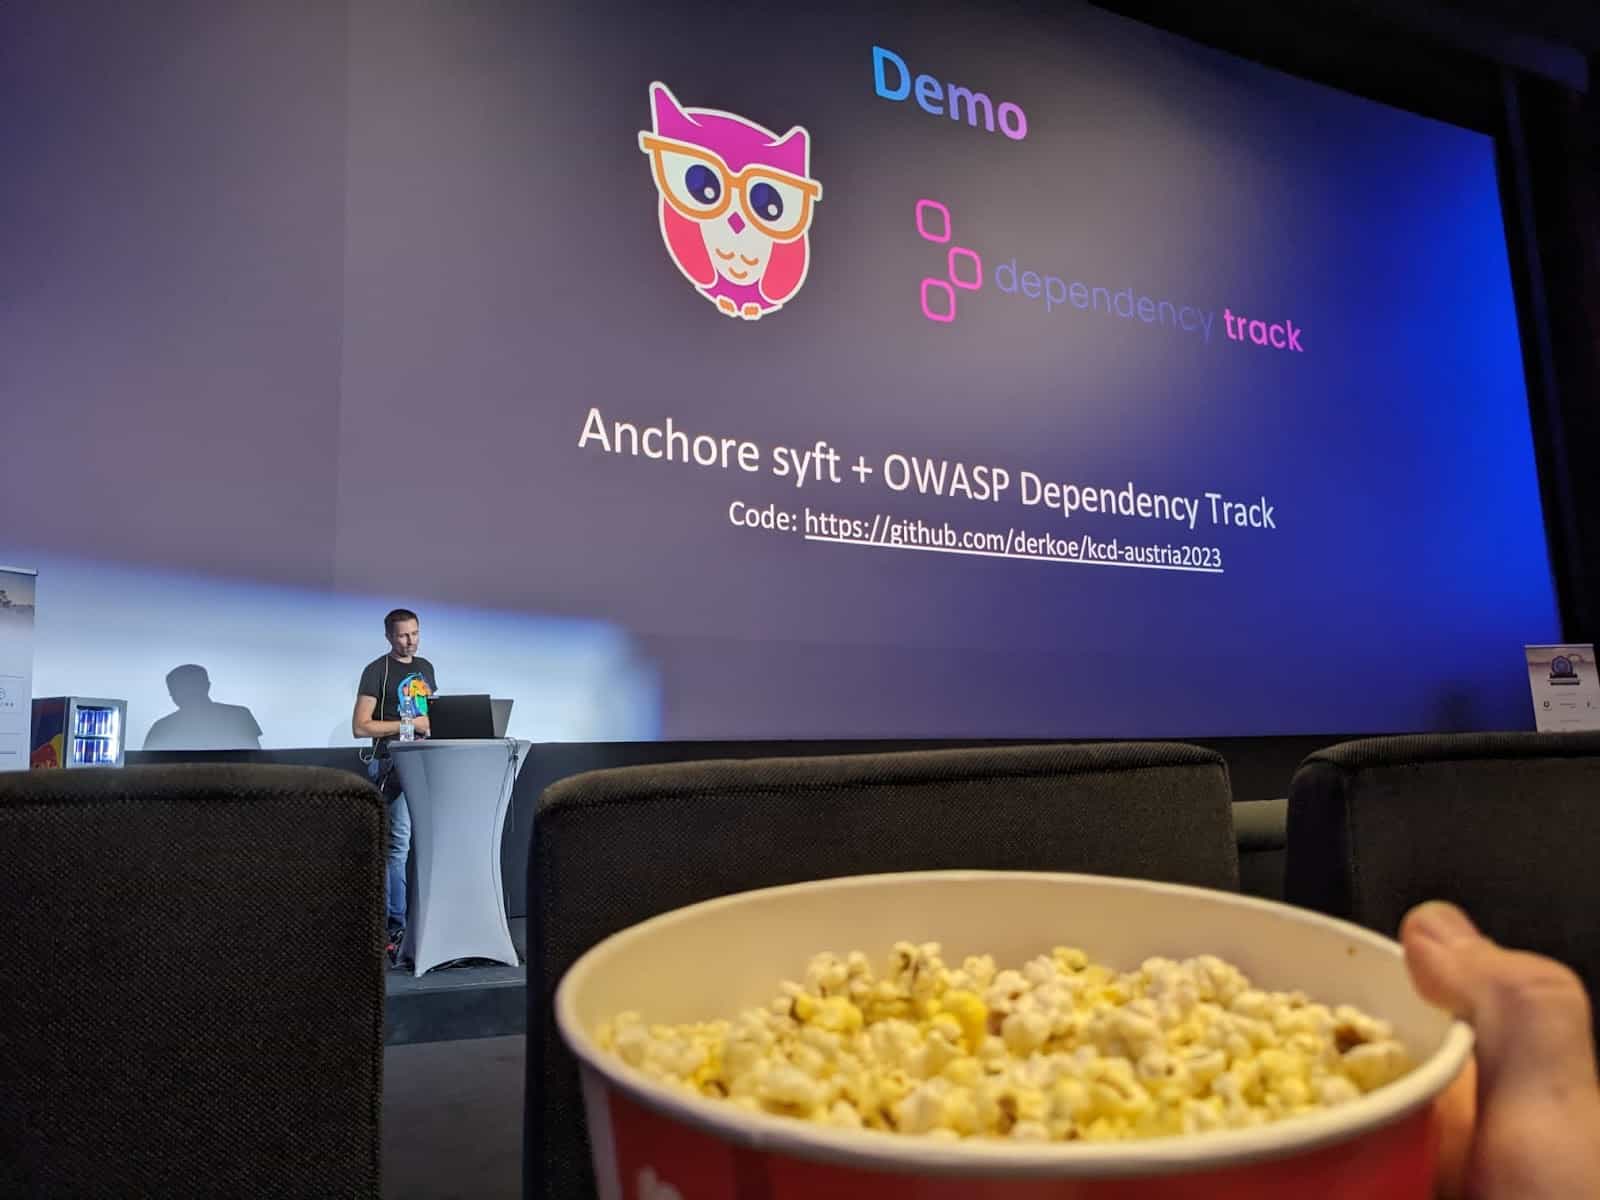 A person holding popcorn while listening to the talk Demo about Anchor syft + OWASP Dependency Track